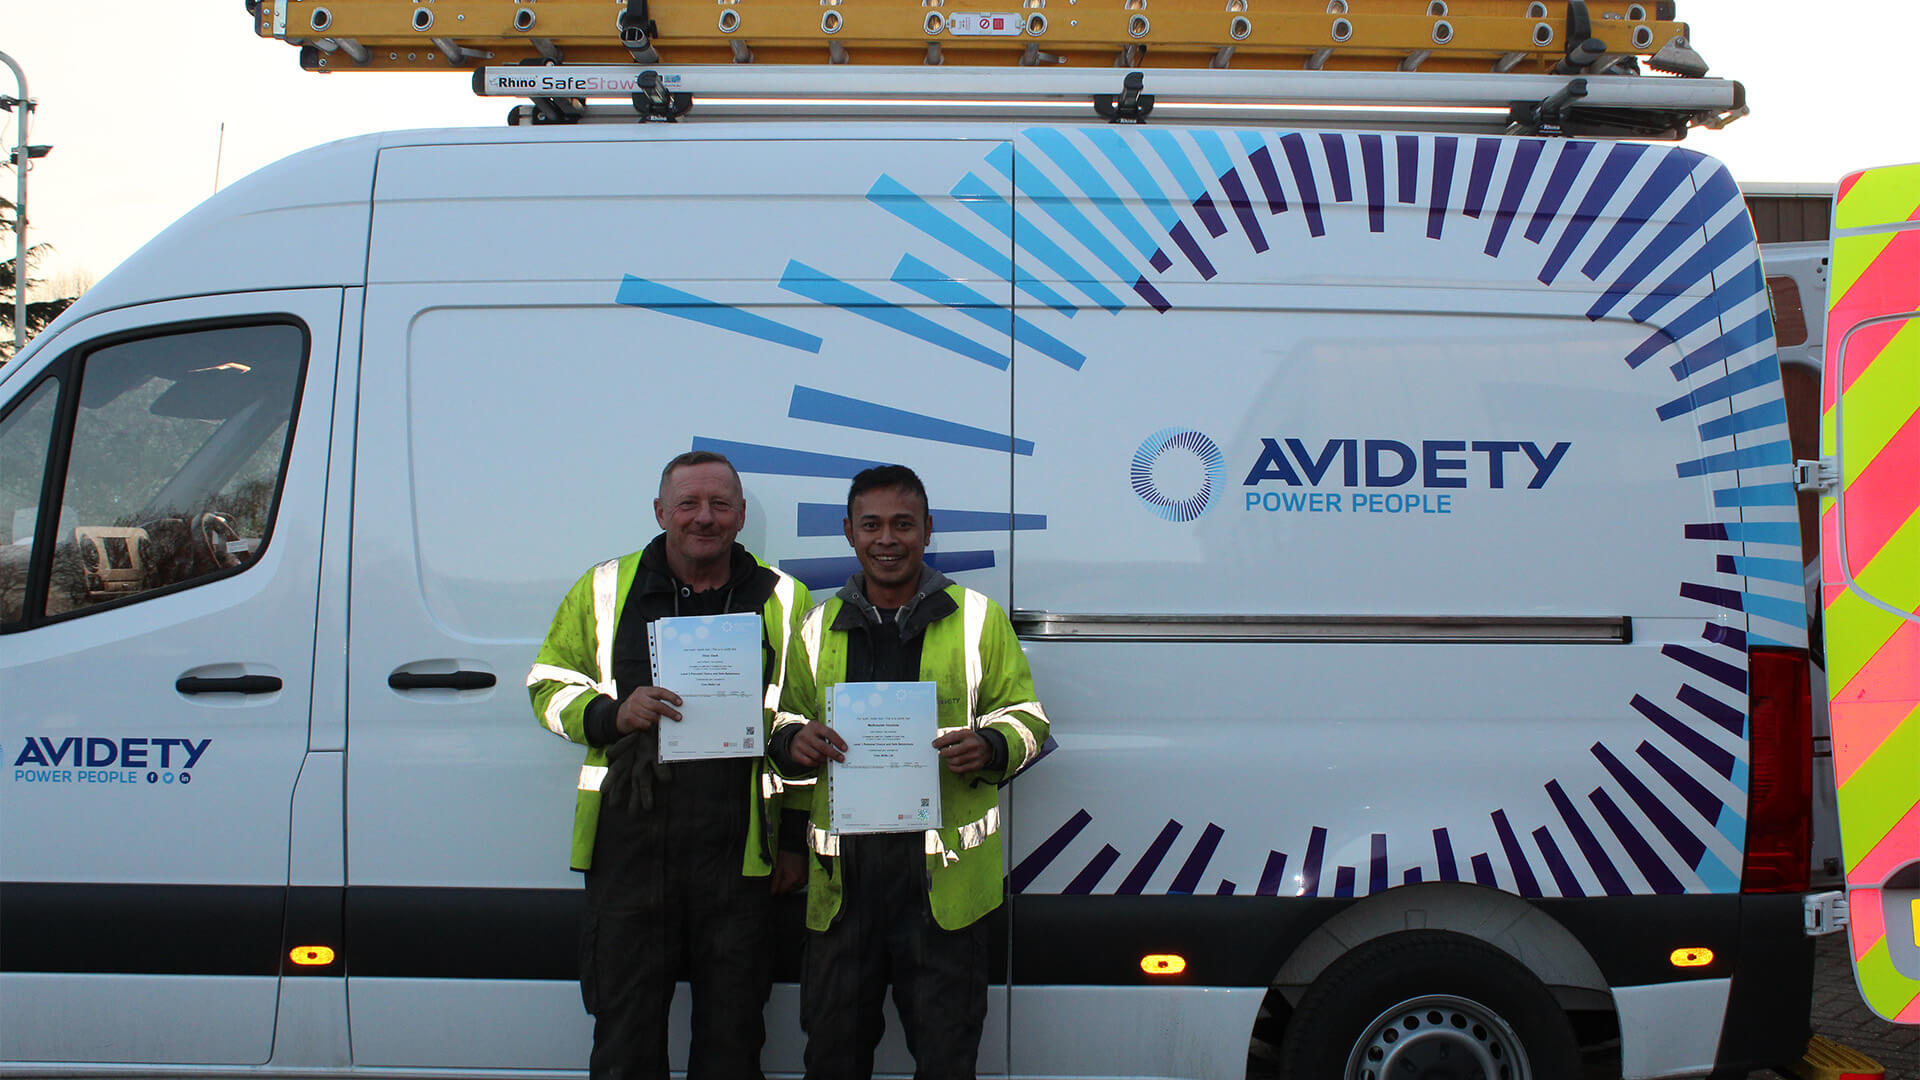 2 Men Standing in Front of Avidety Van in High Visibility Jackets, Holding Certificates